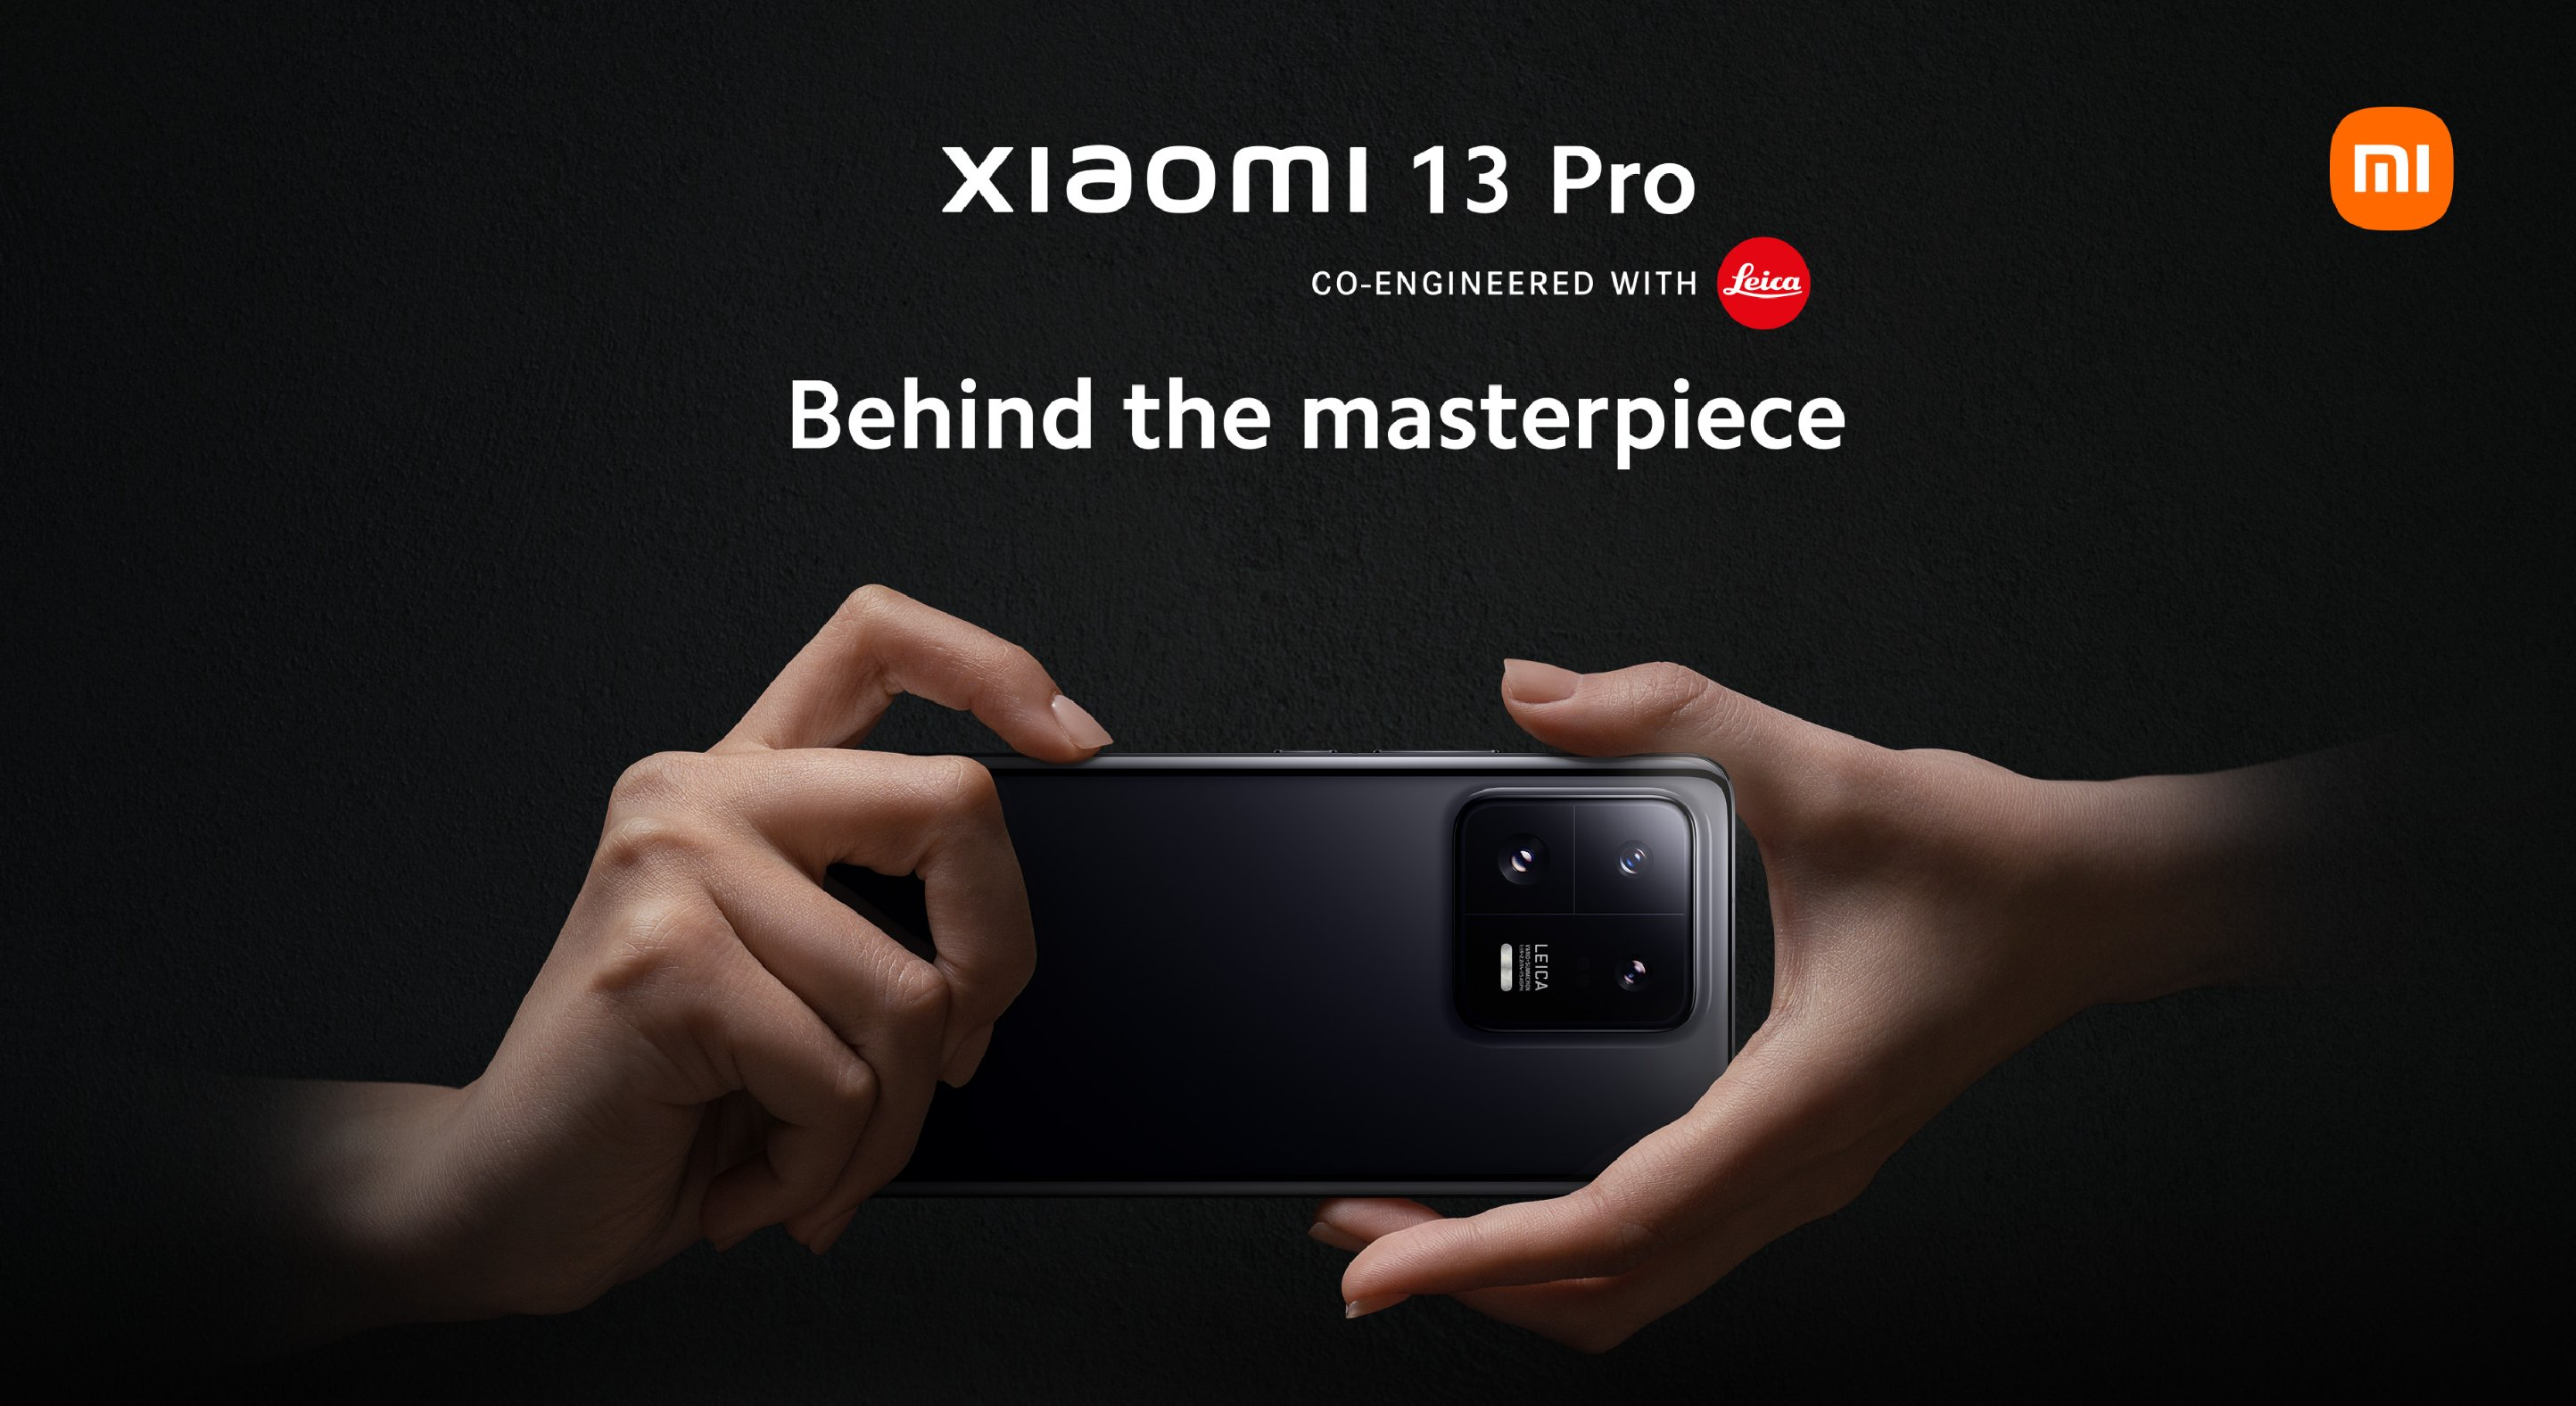 Snapdragon 8 Gen 2, 3K 120Hz display, three 50MP Leica cameras with 8K UHD support and IP68 pricing from €1299 - Xiaomi 13 Pro unveiled